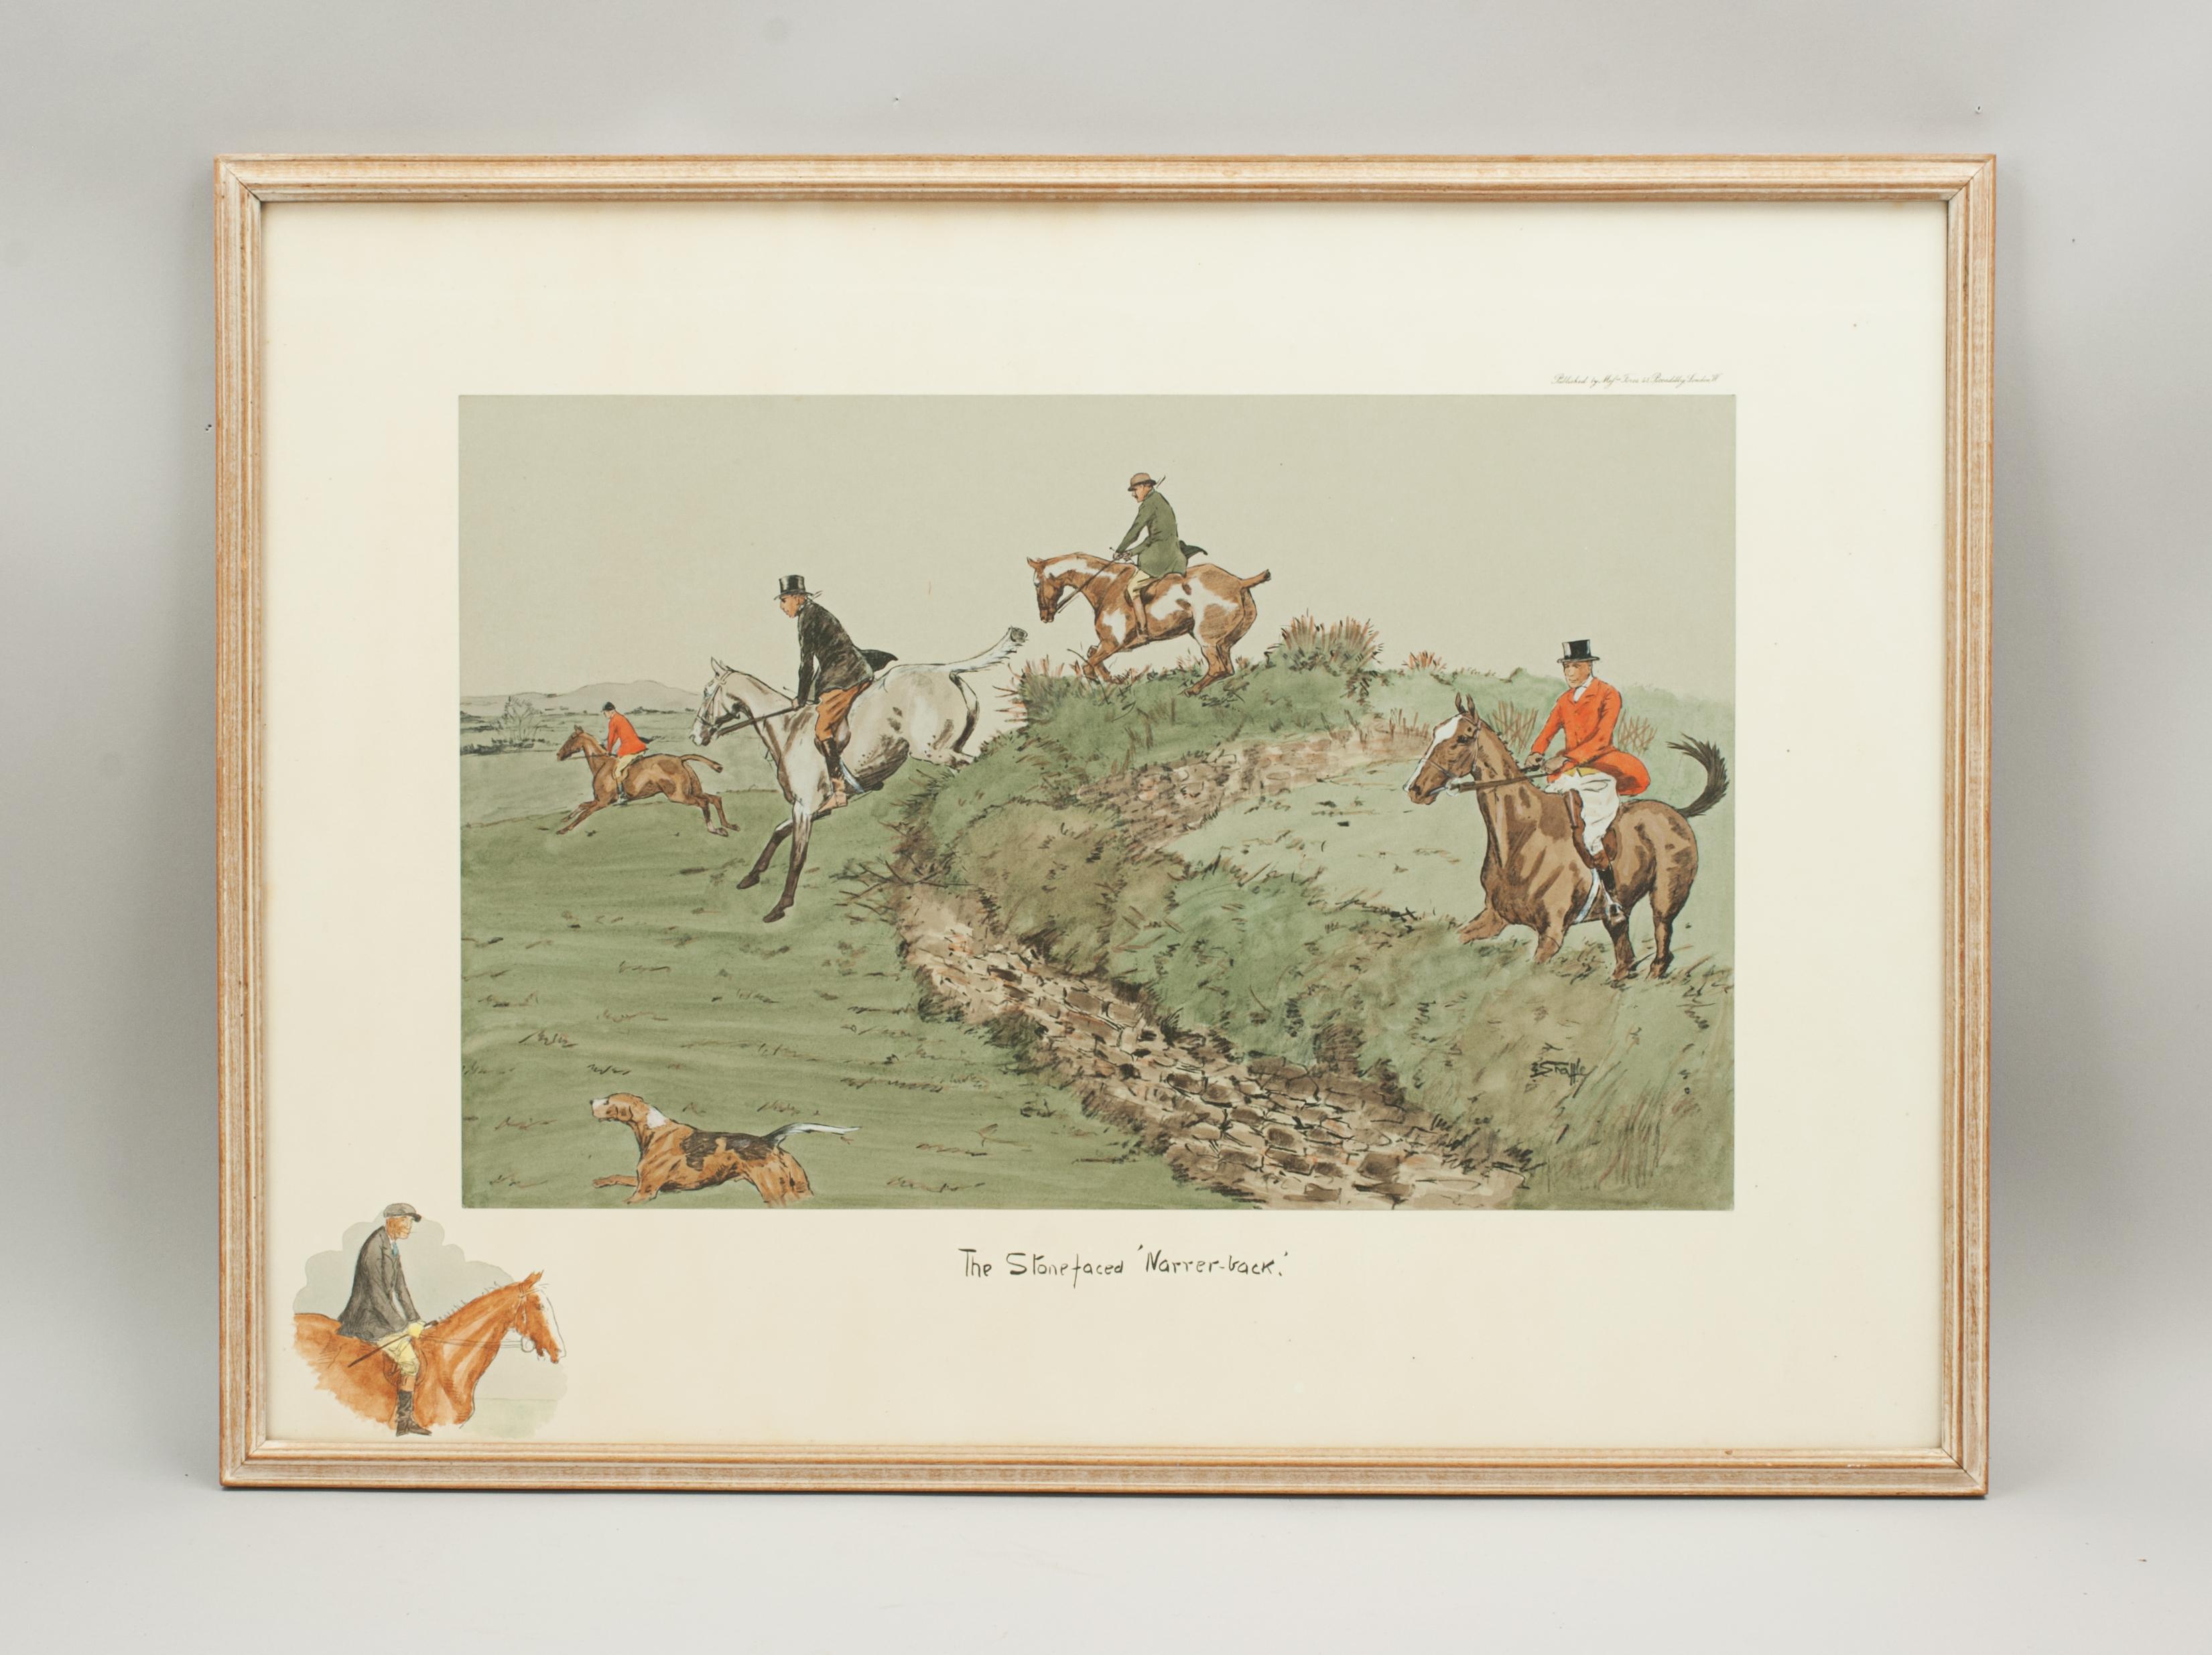 Vintage Charles Johnson Payne Hunting Print, The Stonefaced 'Narrer-back'.
A rare hand coloured Snaffles lithograph entitled The Stonefaced 'Narrer-back'. The image is of two huntsmen about to jump a turf-topped stone wall. Another huntsman can be